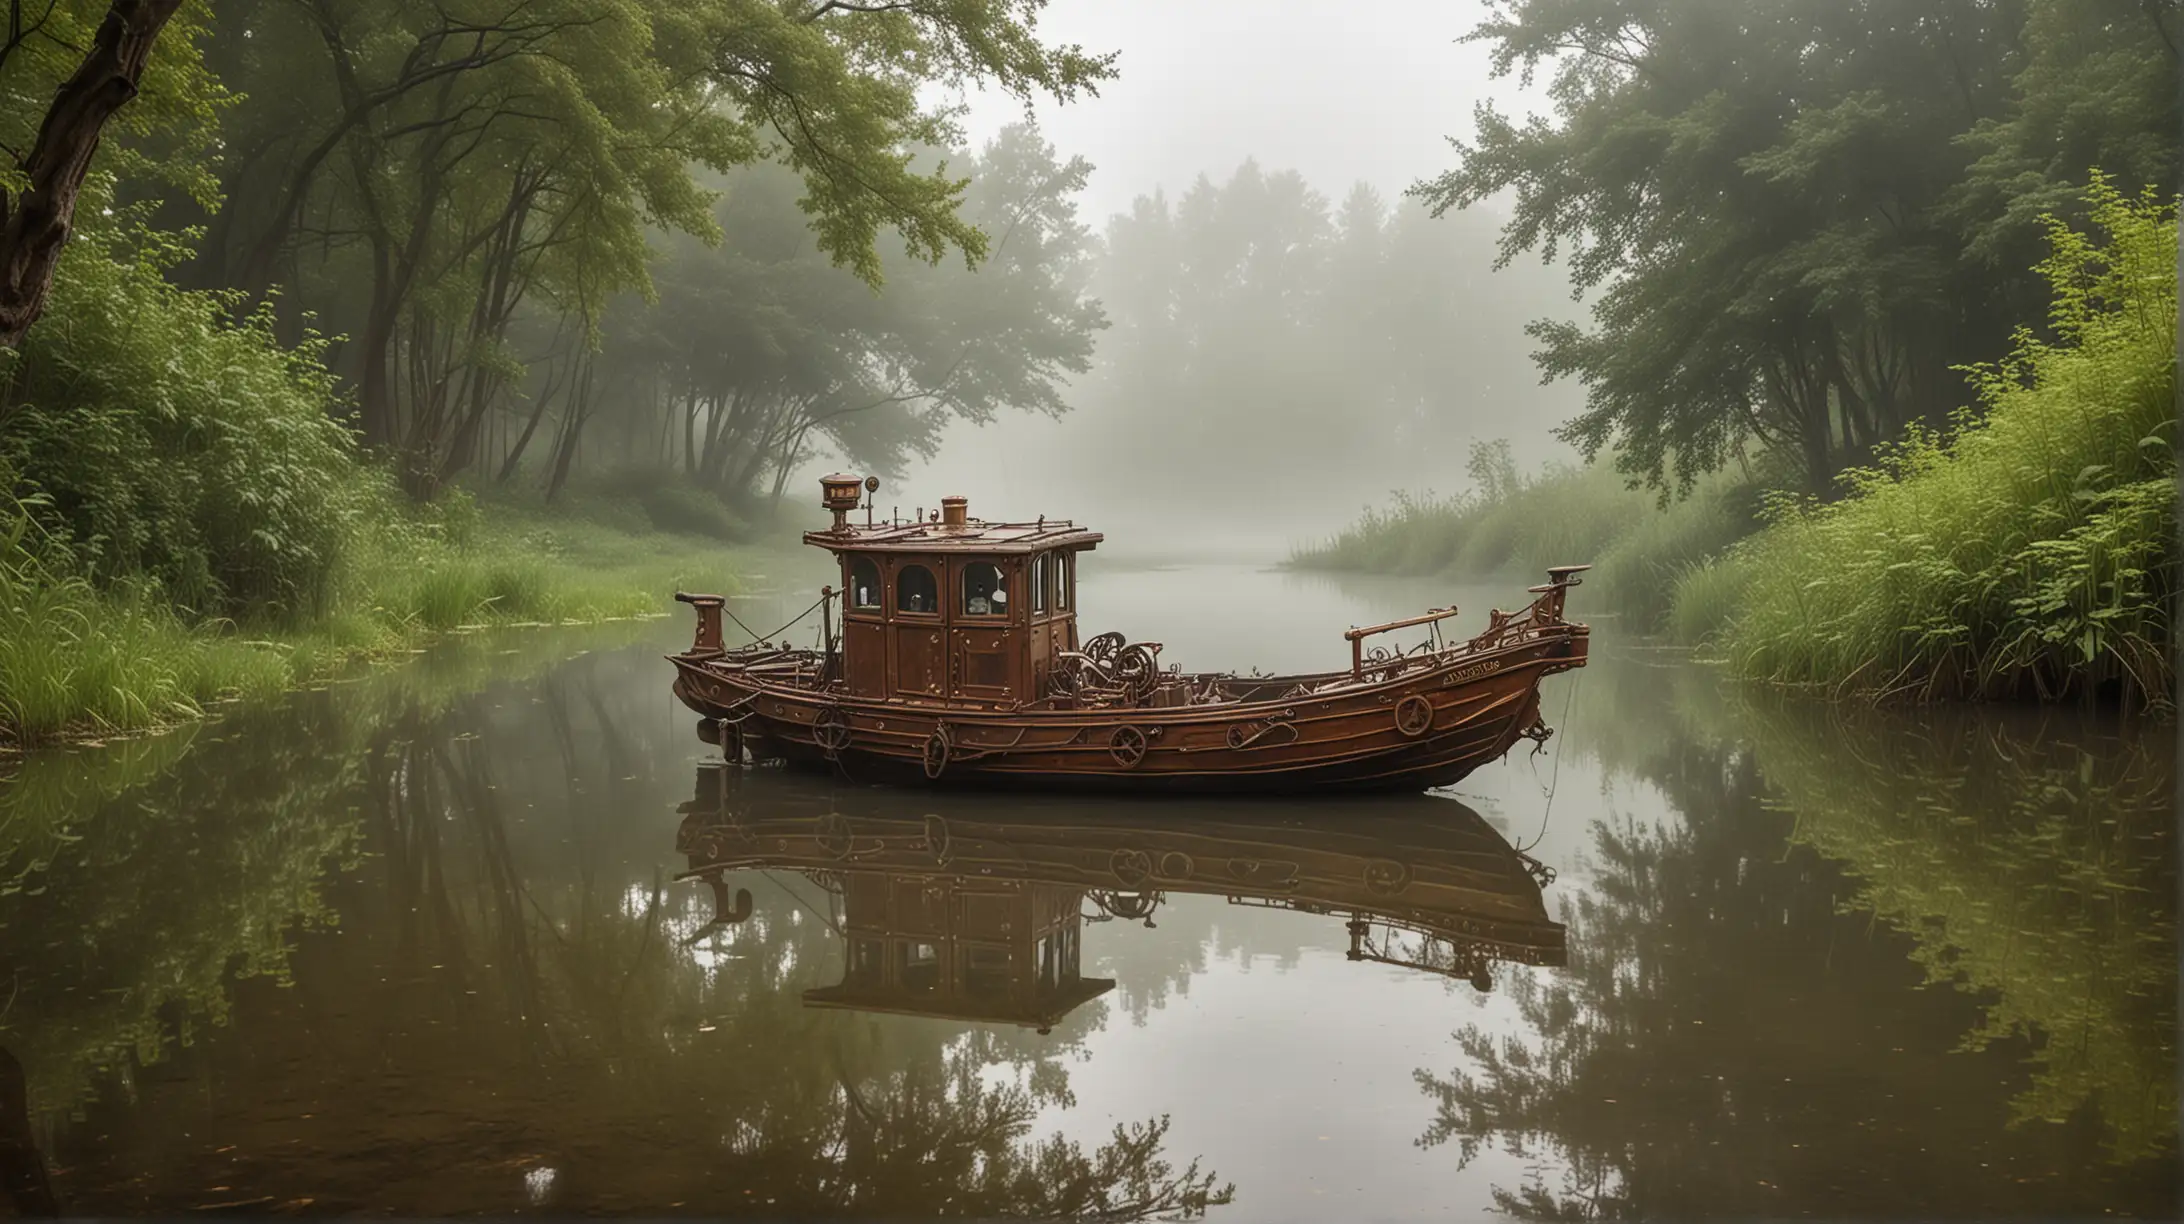 a small steampunk boat wharfed to the shore of a wild pond in a park, cloudy, much steam and fog